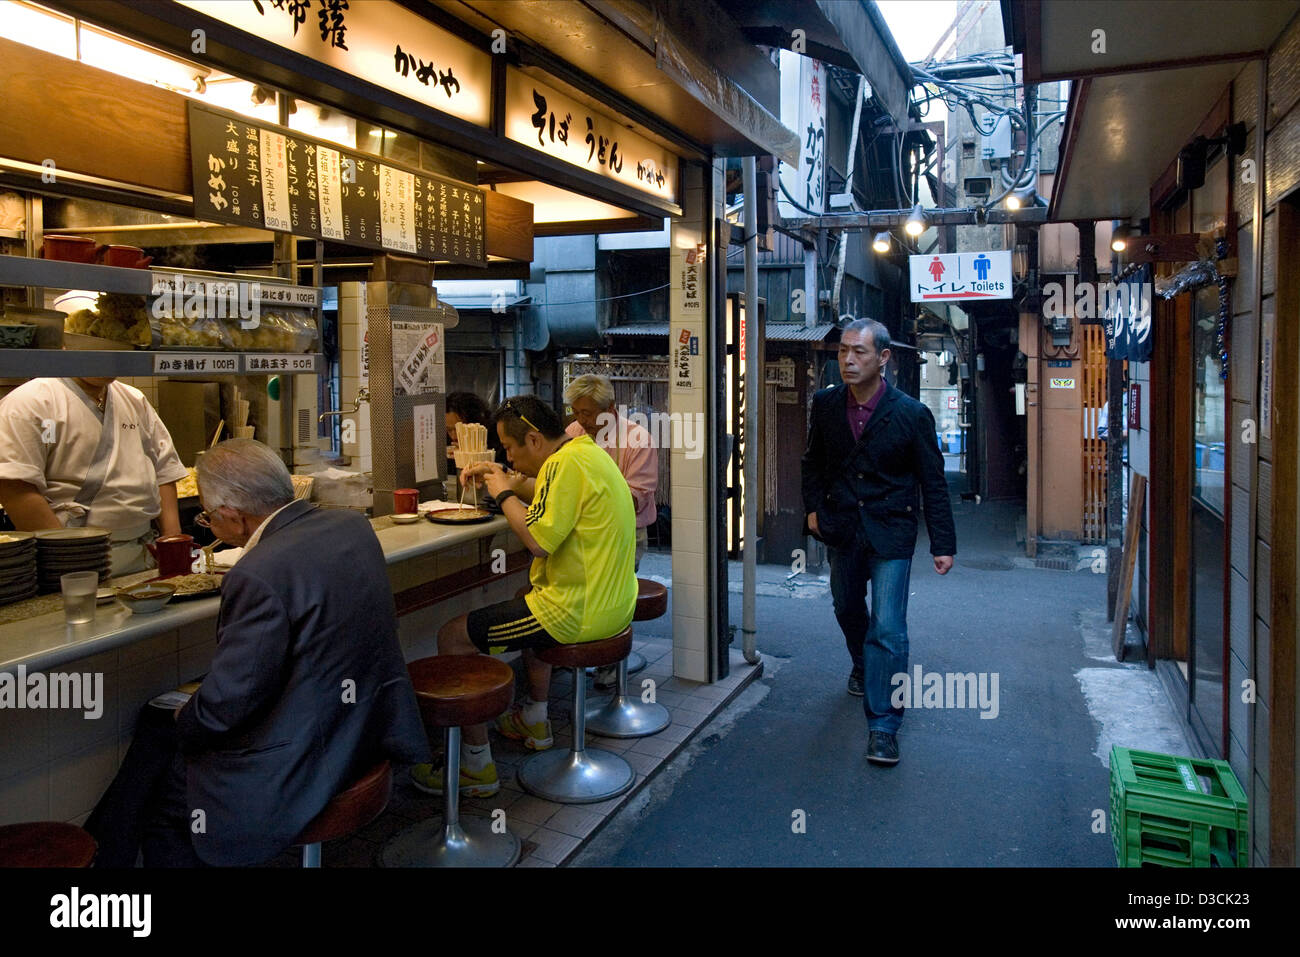 Unchanged since 1950's a narrow alley called Omoide Yokocho, or Memory Lane, in Shinjuku, Tokyo is packed with small restaurants Stock Photo